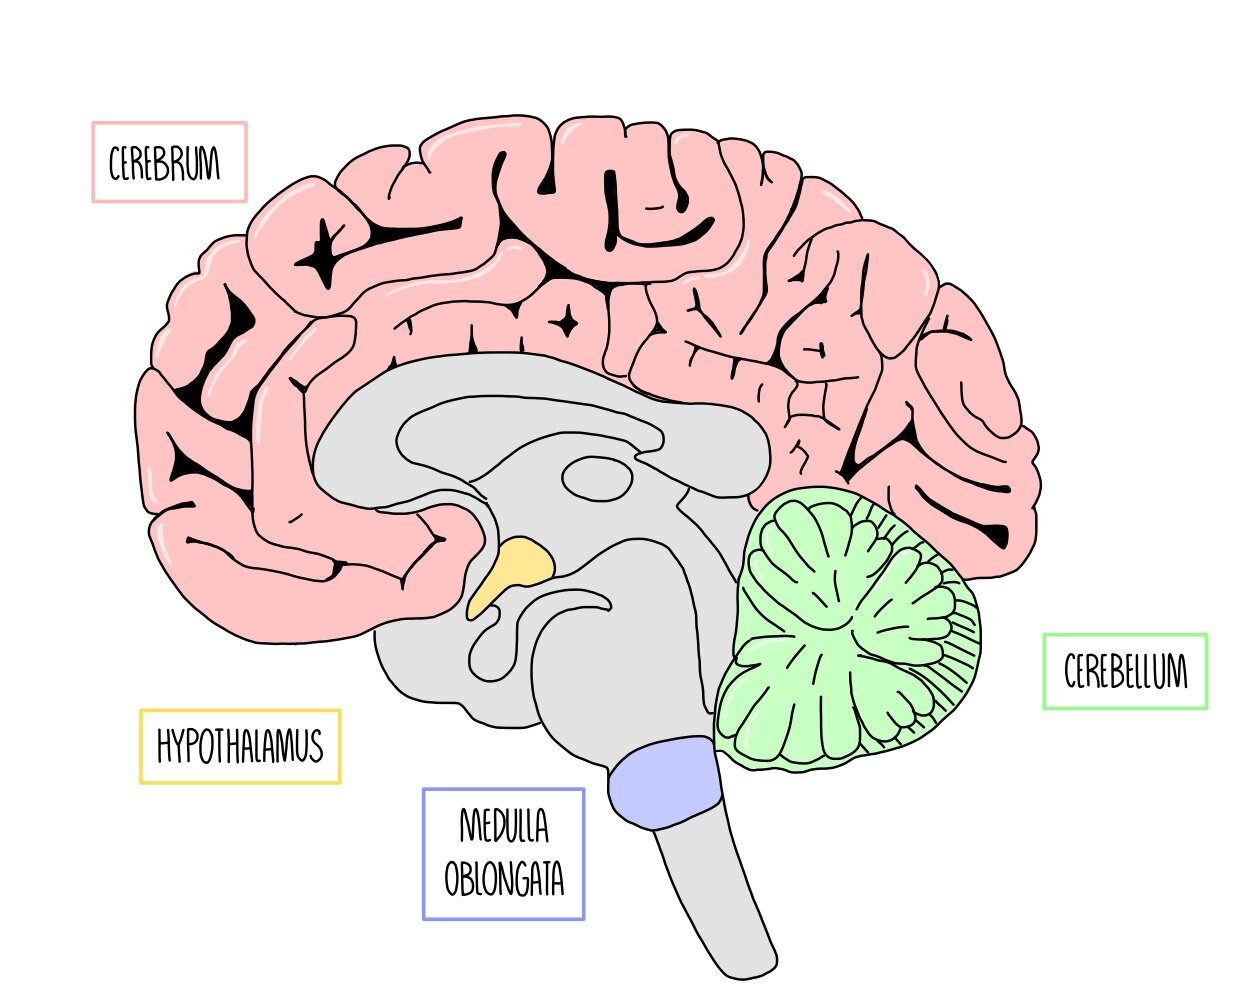 Cerebral cortex: Structure and functions